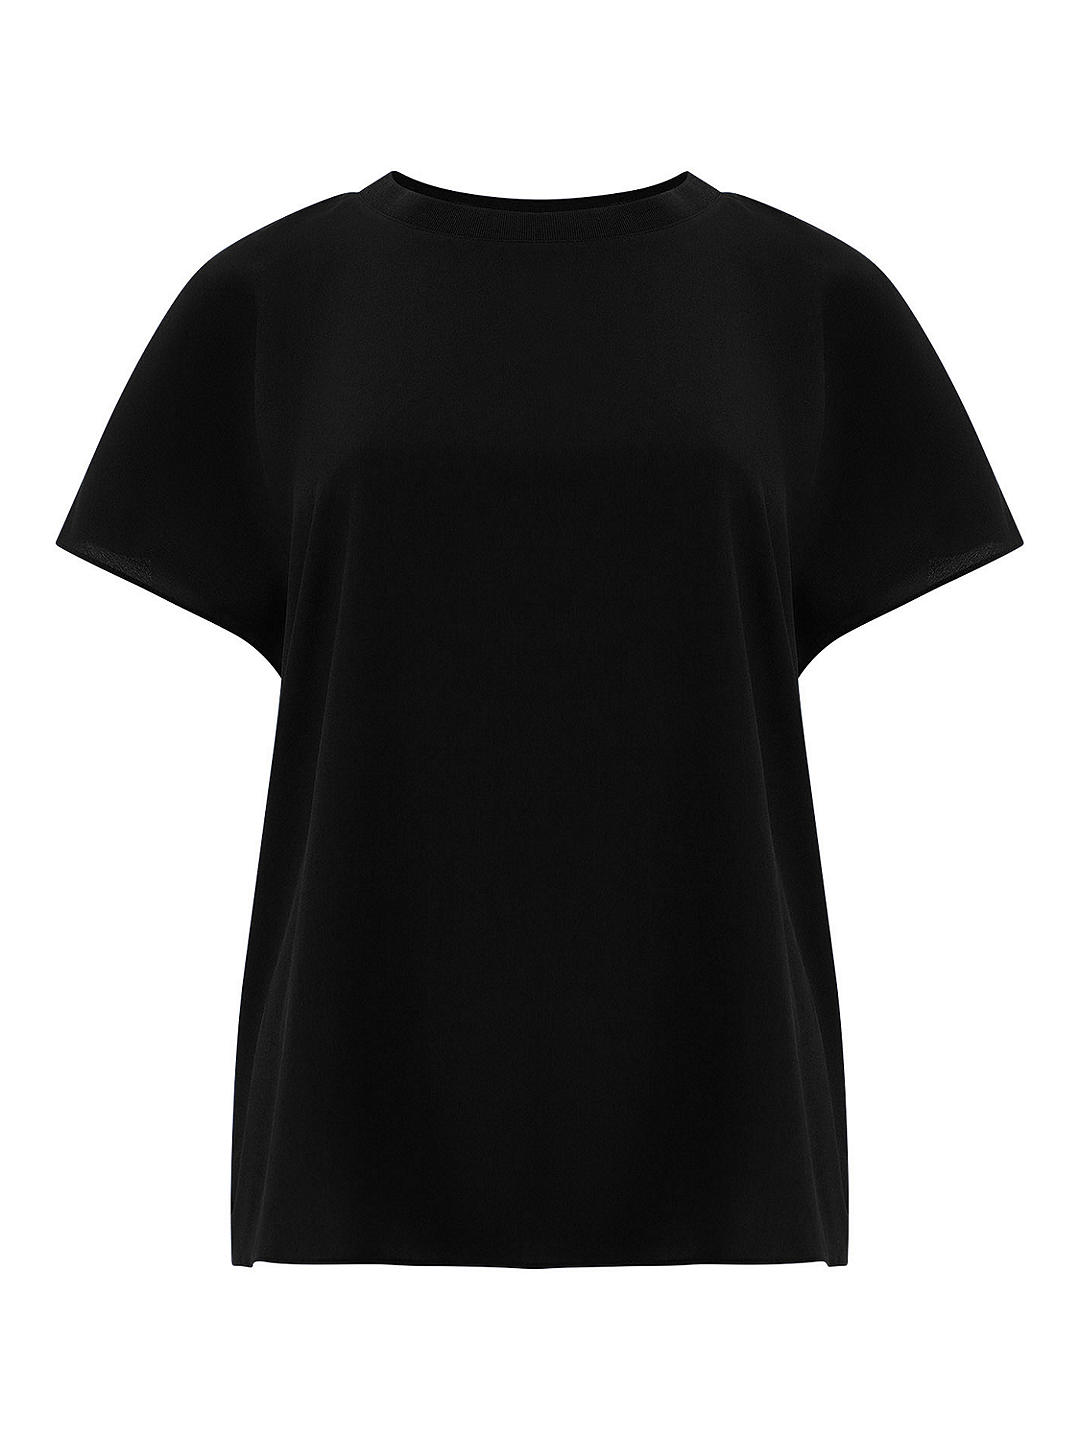 French Connection Light Crepe Crew Neck Top, Black              